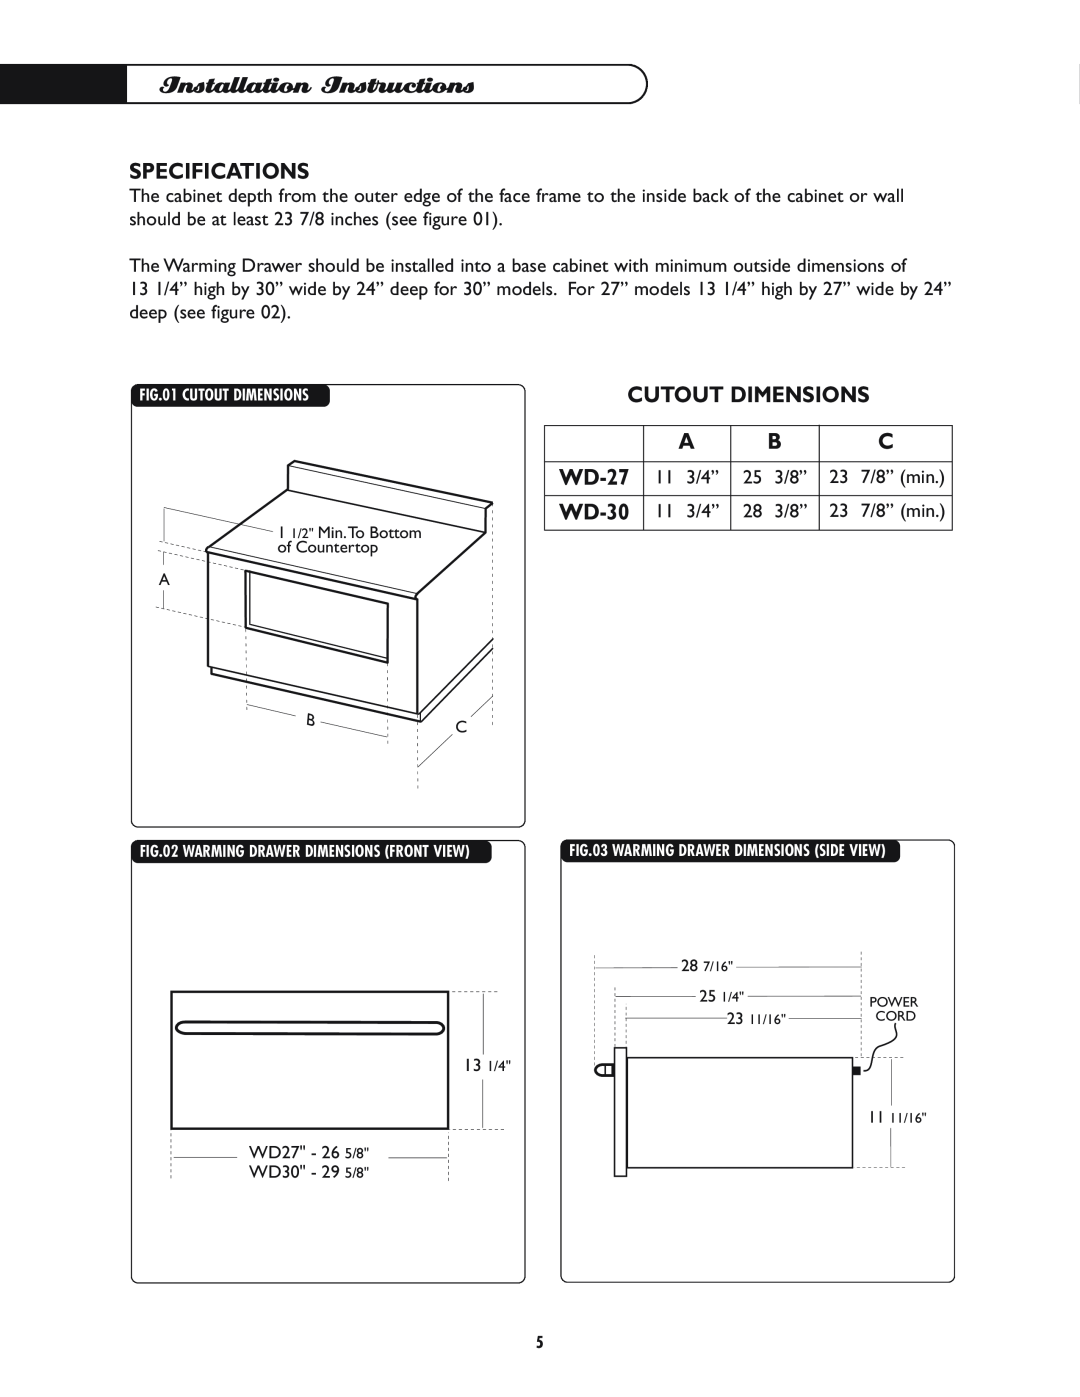 DCS WD-30-BL manual Installation Instructions, Specifications, Cutout Dimensions, WD-27 